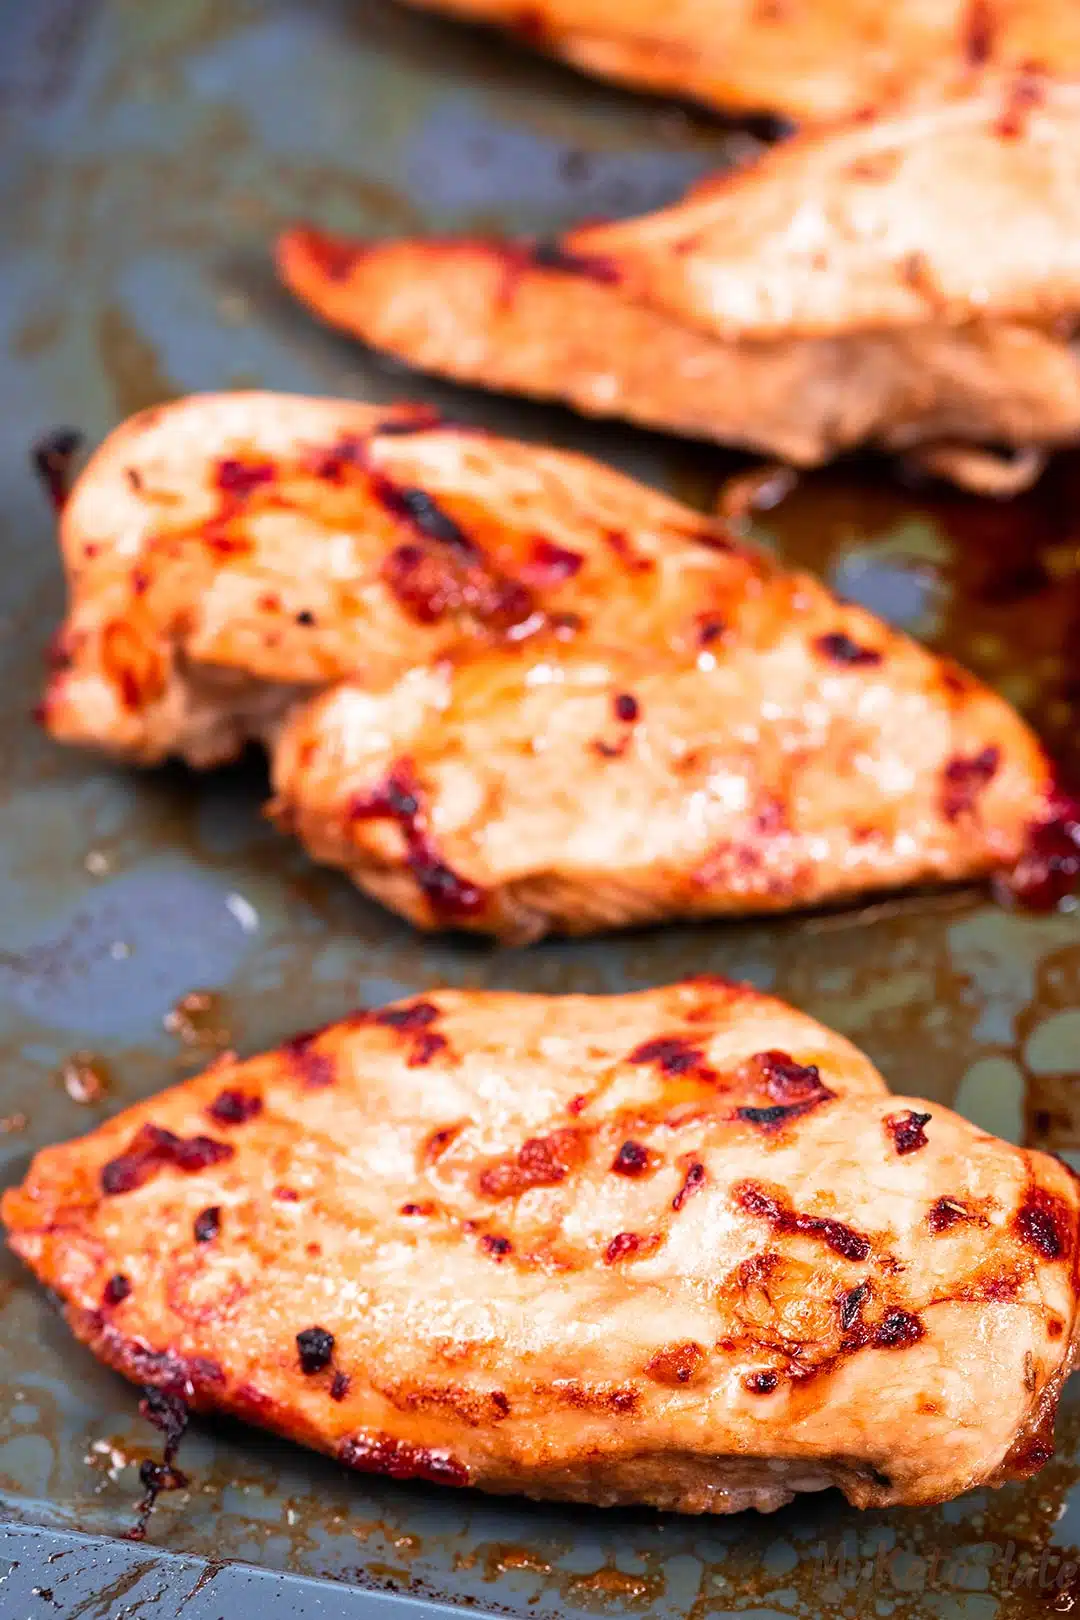 Oven Baked Chicken Breast